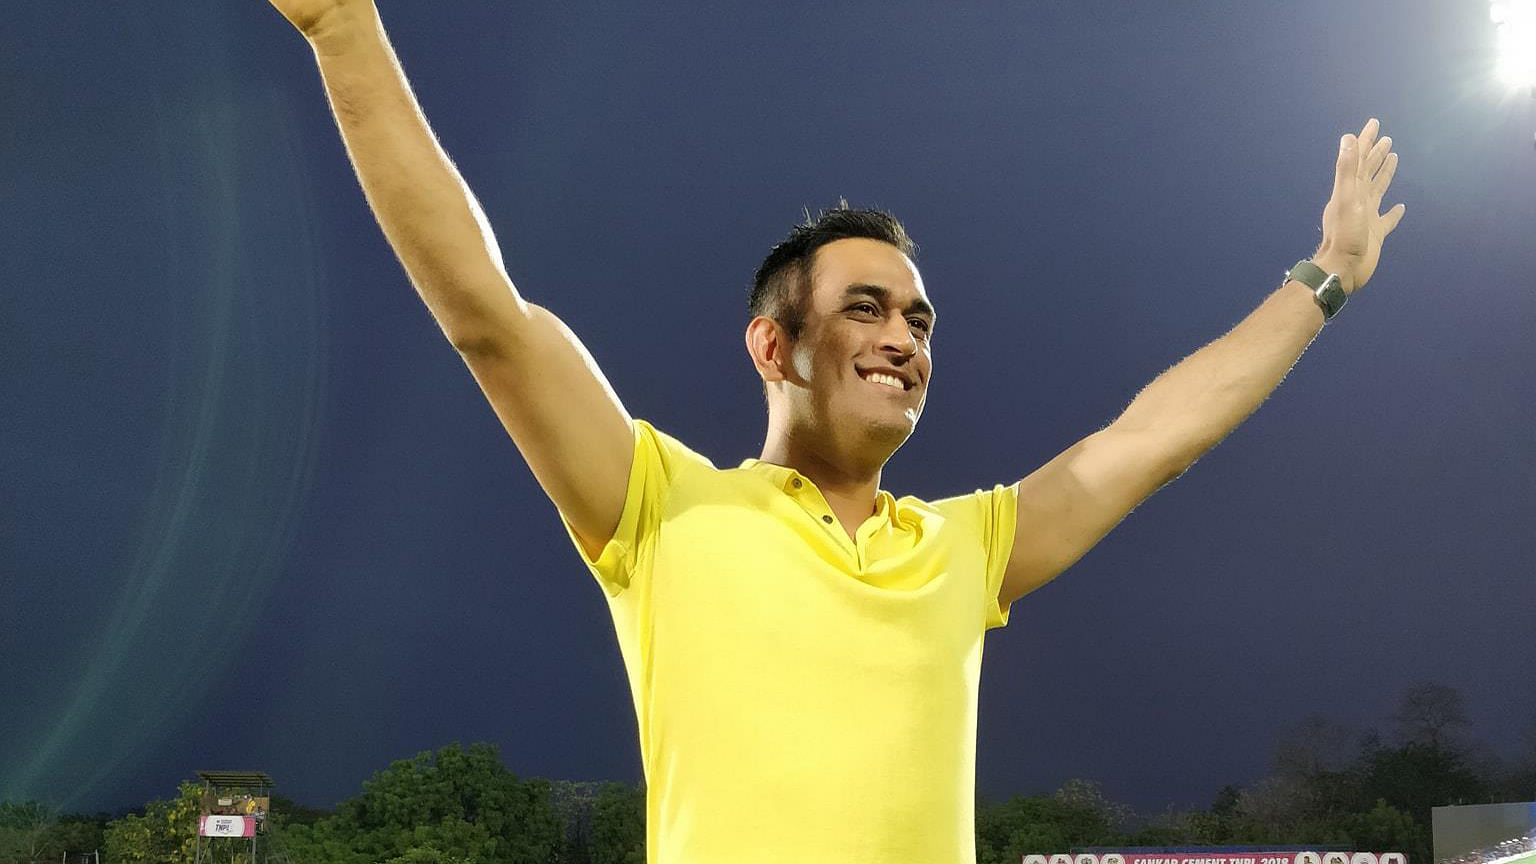 MS Dhoni made an appearance at a Tamil Nadu Premier League event in Tirunelveli on Sunday.